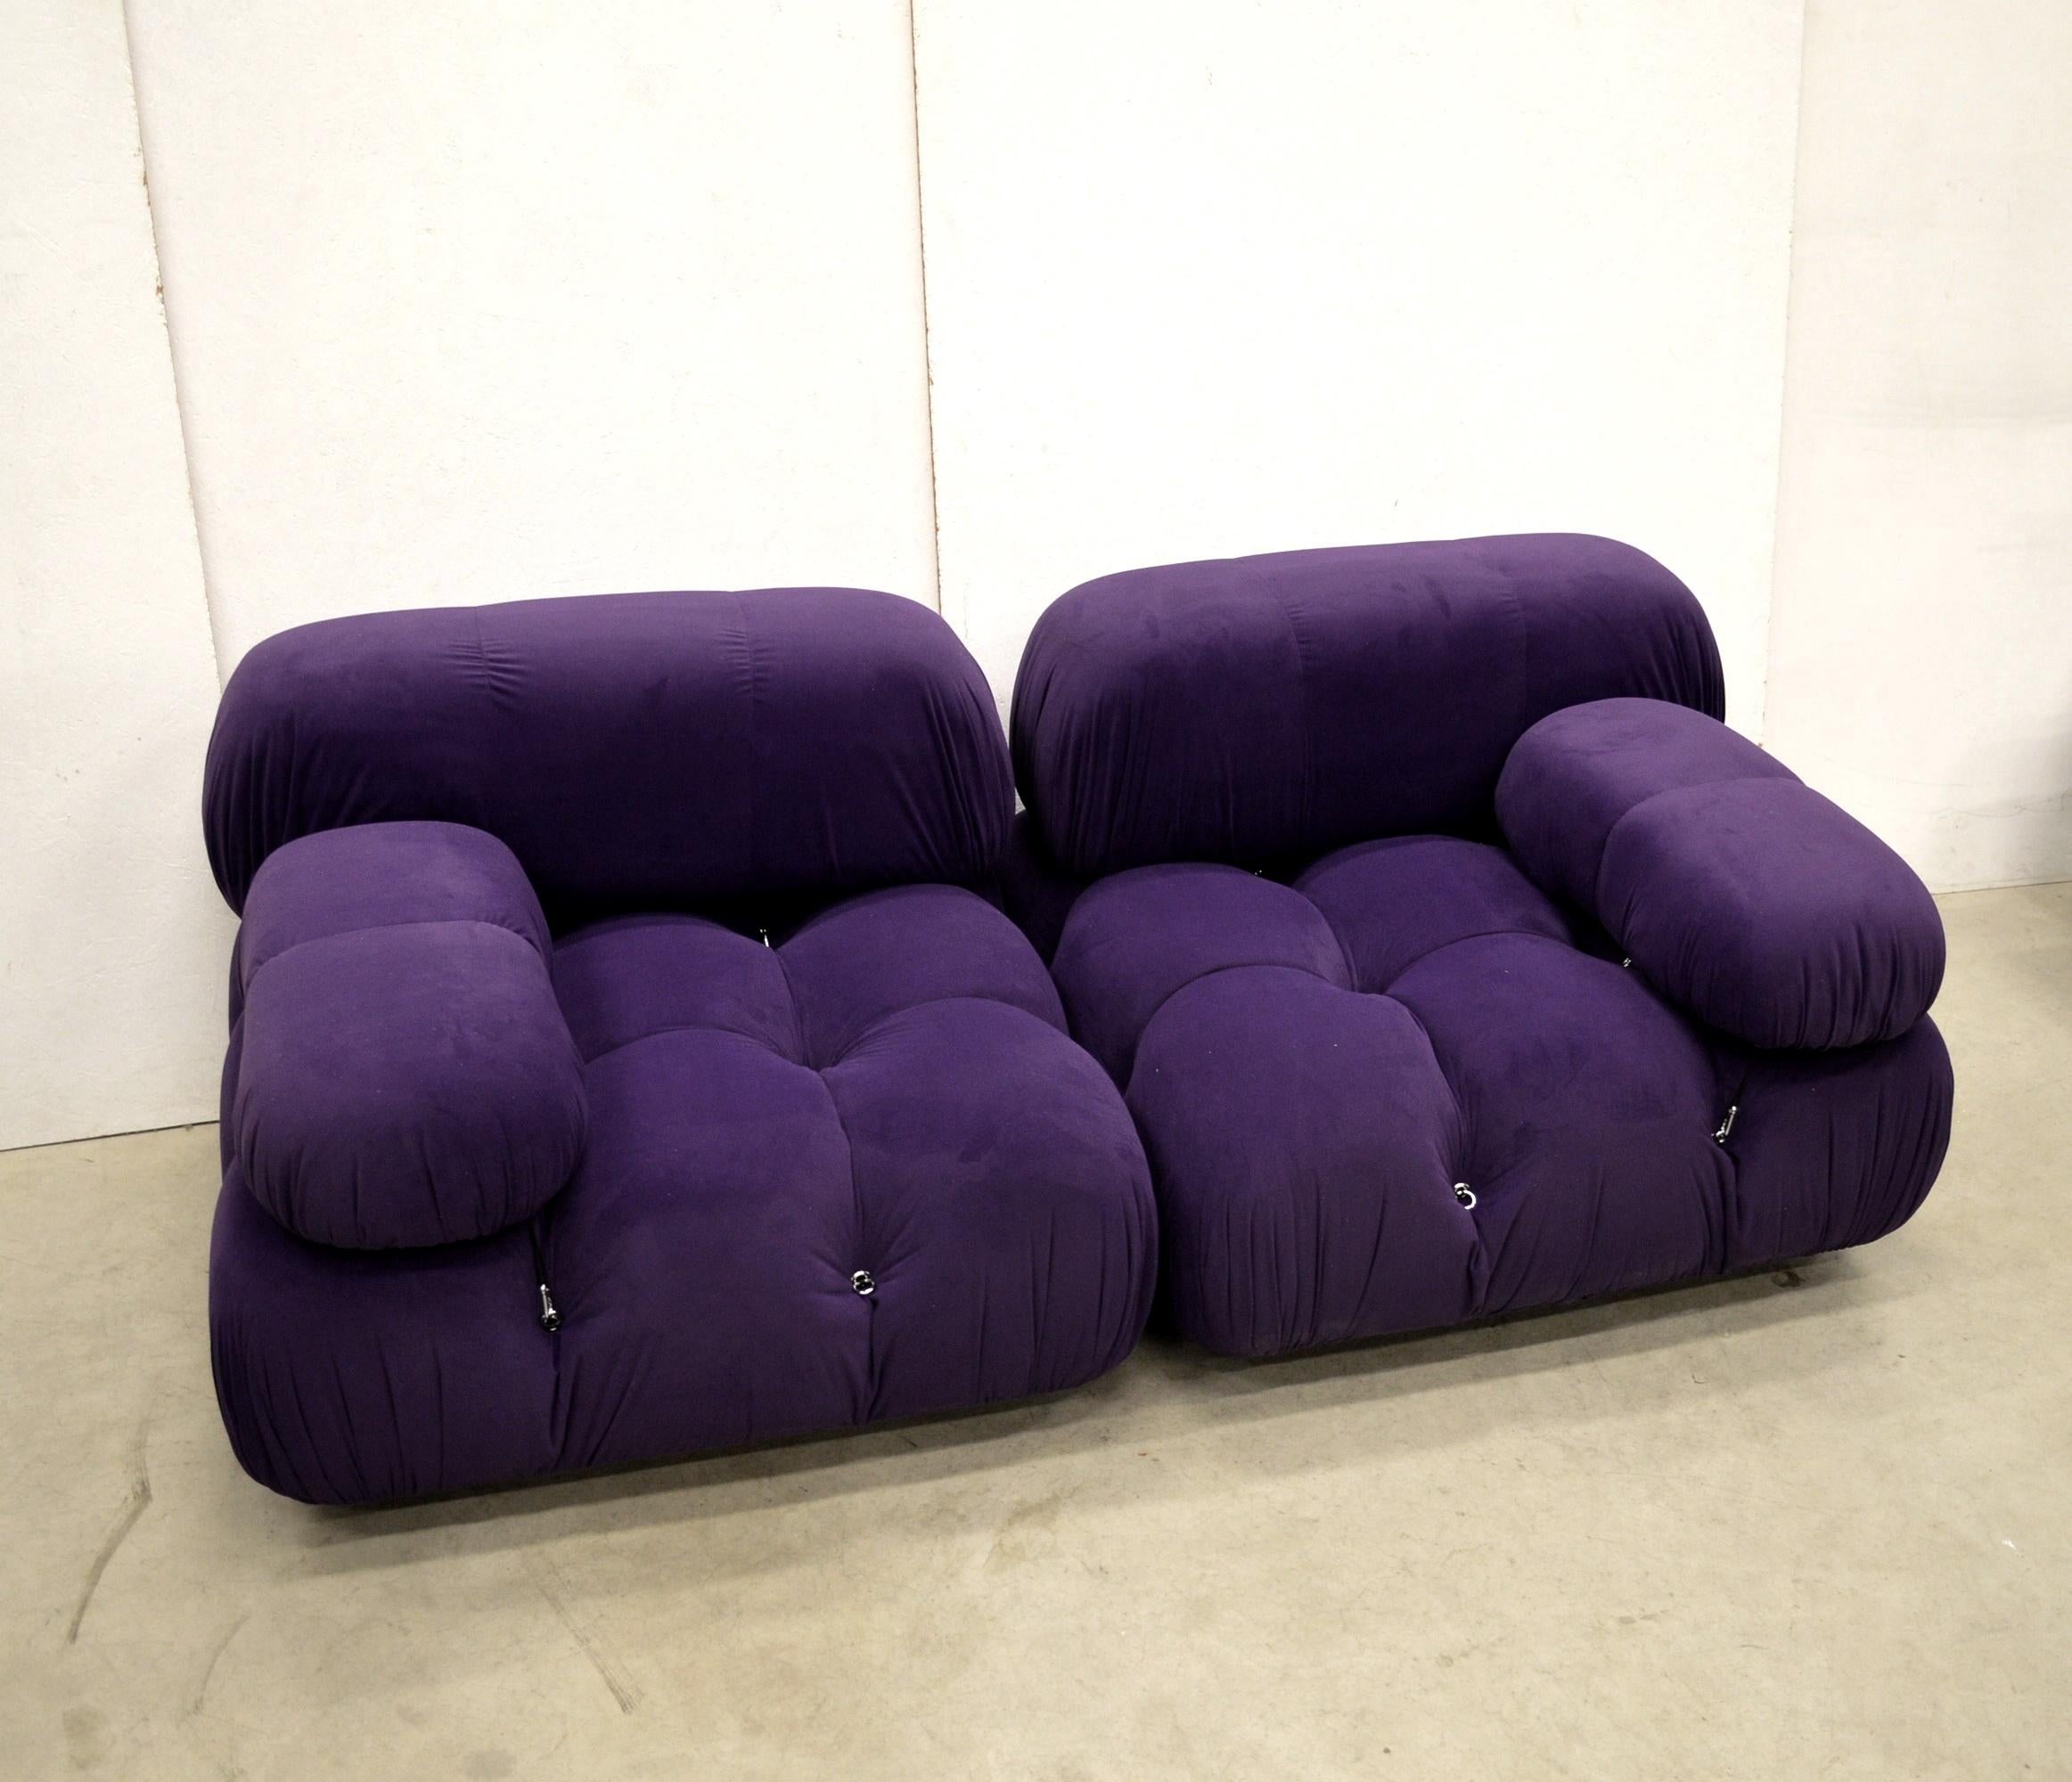 Impressive purple Camaleonda modular element sofa including 2 elements and armrests.
 Designed by Mario Bellini for C&B / B&B Italia, 1970s.

Amazing purple velvet edition which comes in an excellent condition.
Timeless & stunning design - maybe